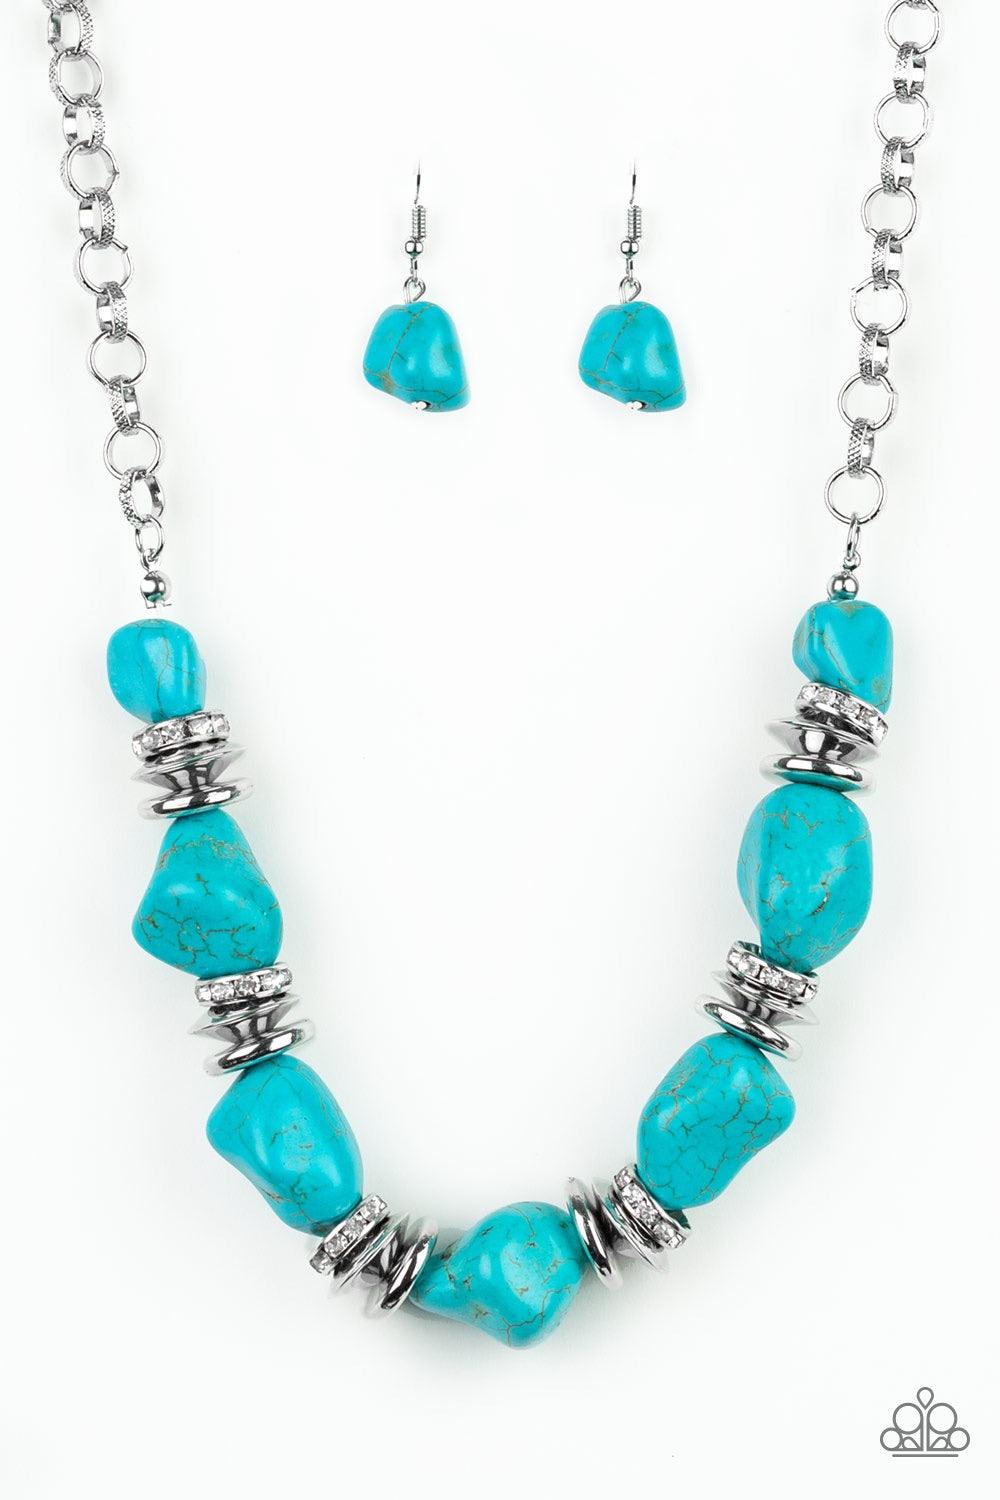 Paparazzi Accessories Stunningly Stone Age - Blue A collection of refreshing turquoise stones, shimmery silver accents, and white rhinestone encrusted rings are strung below the collar for a timeless look. Features an adjustable clasp closure. Jewelry